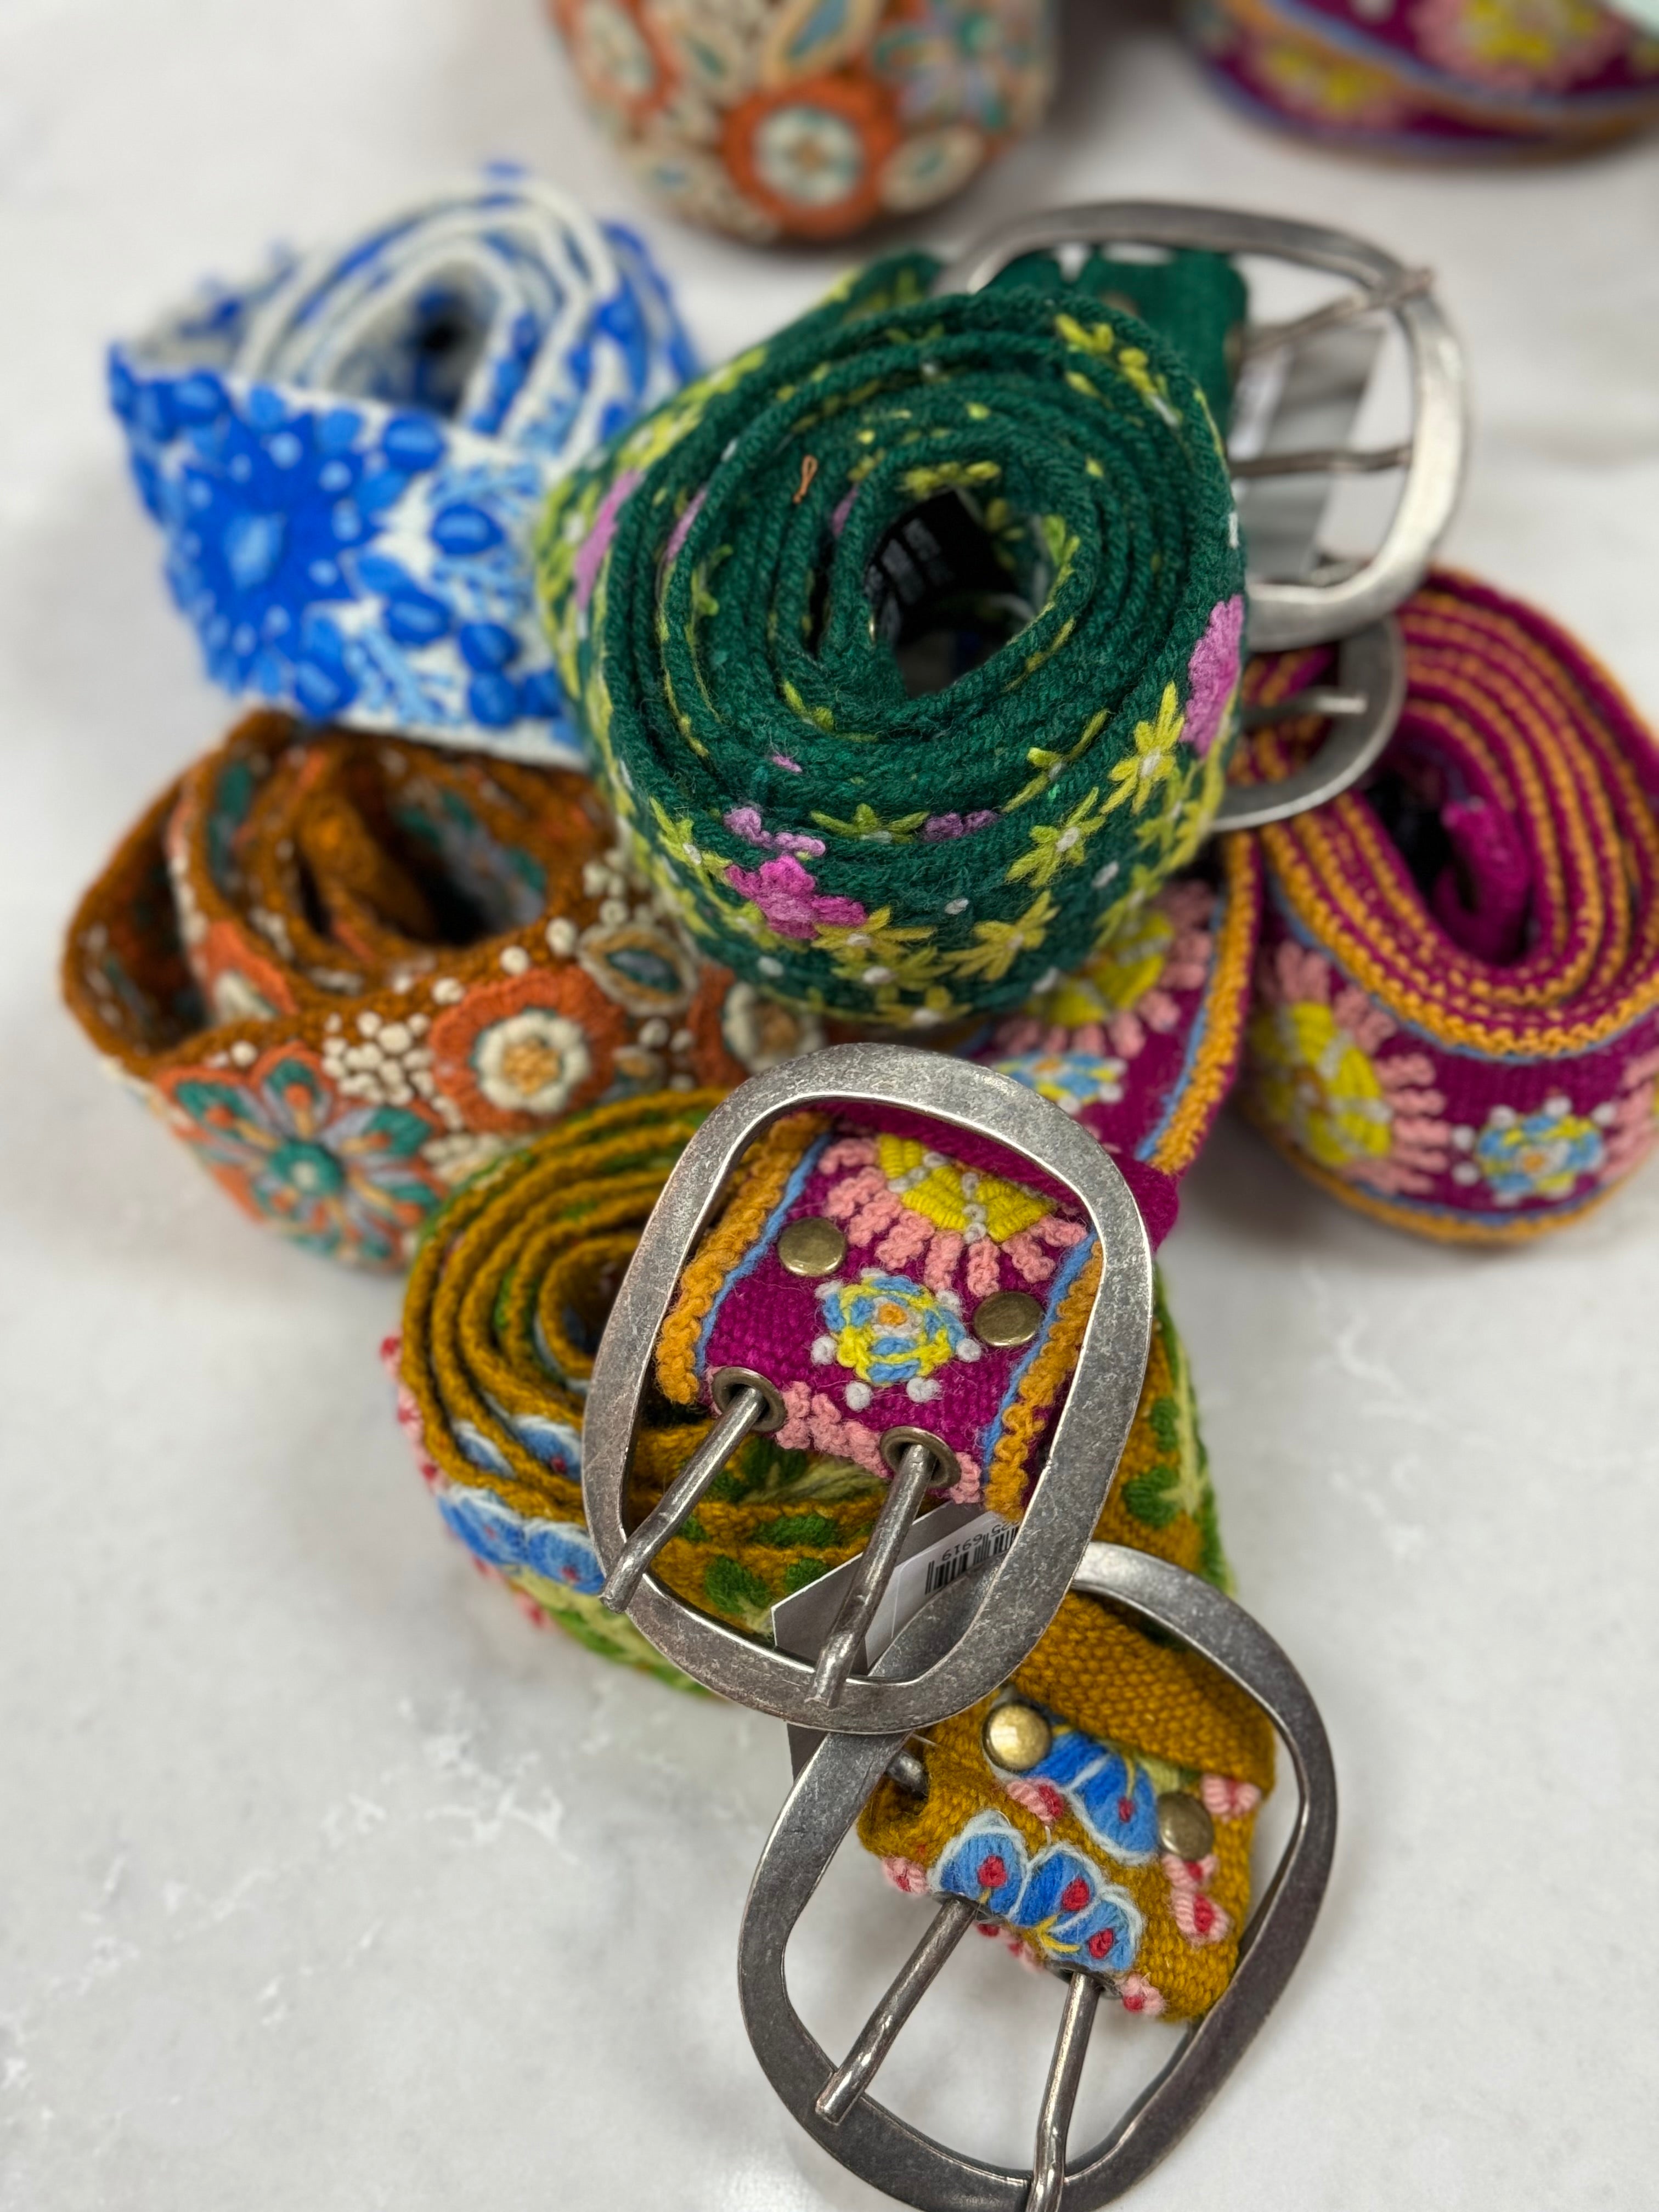 Embroidery Belts (Assorted)